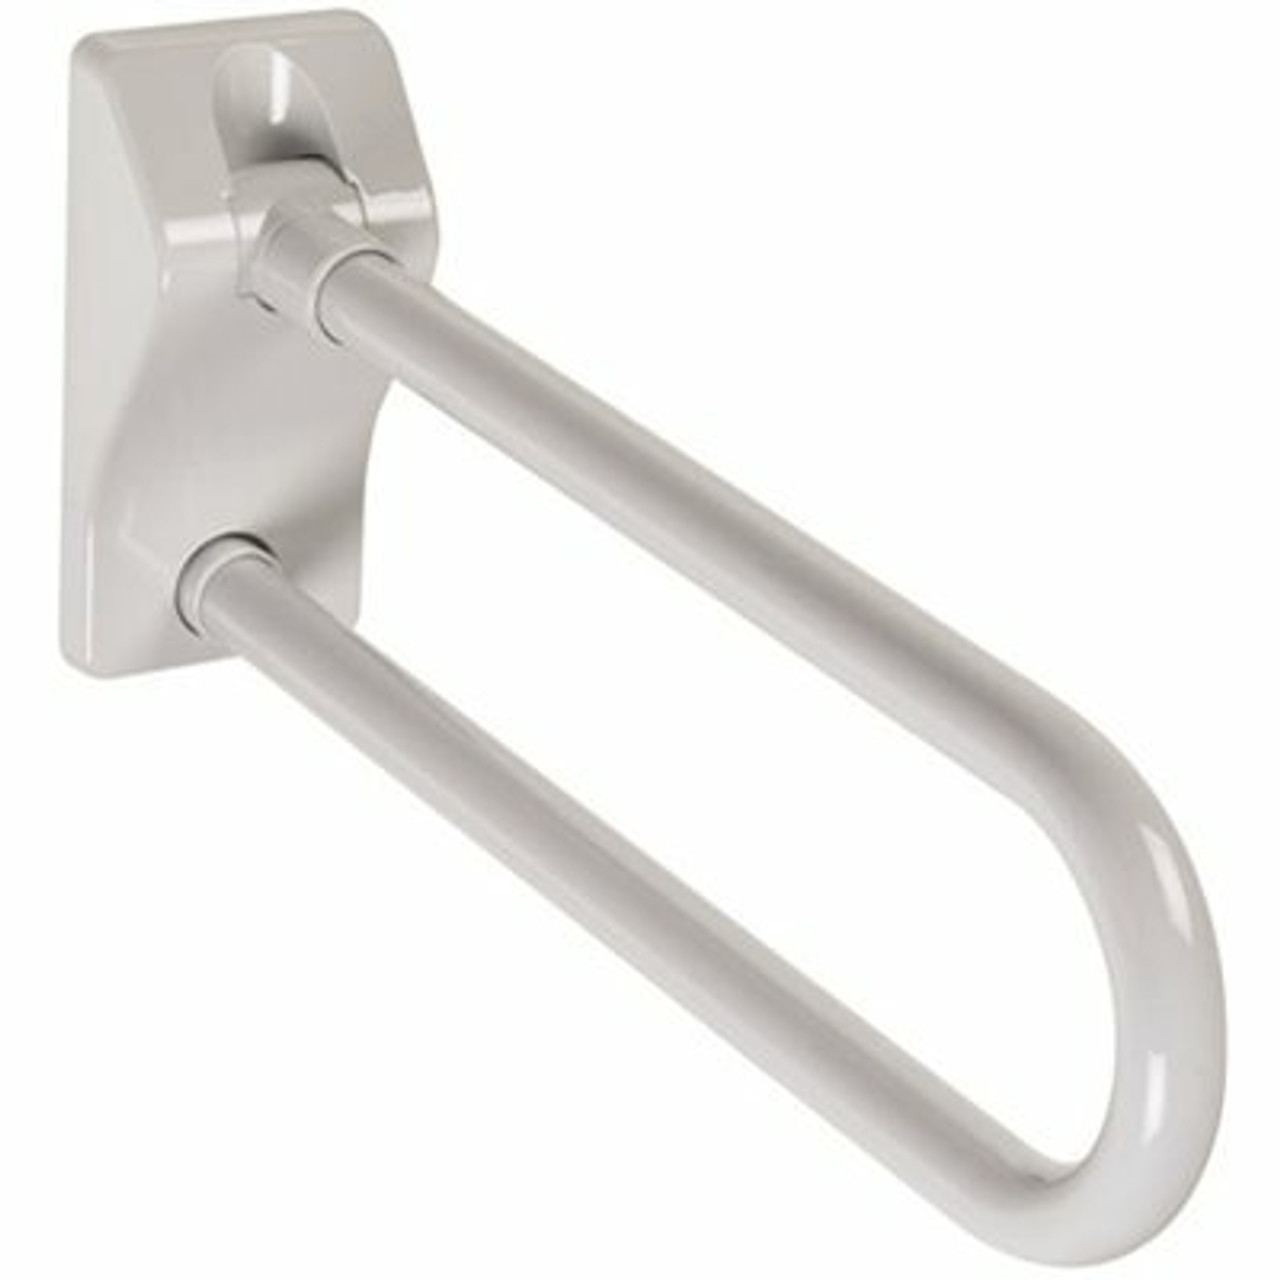 Ponte Giulio Usa 27 In. Antimicrobial Vinyl Coated Folding Grab Bar In White